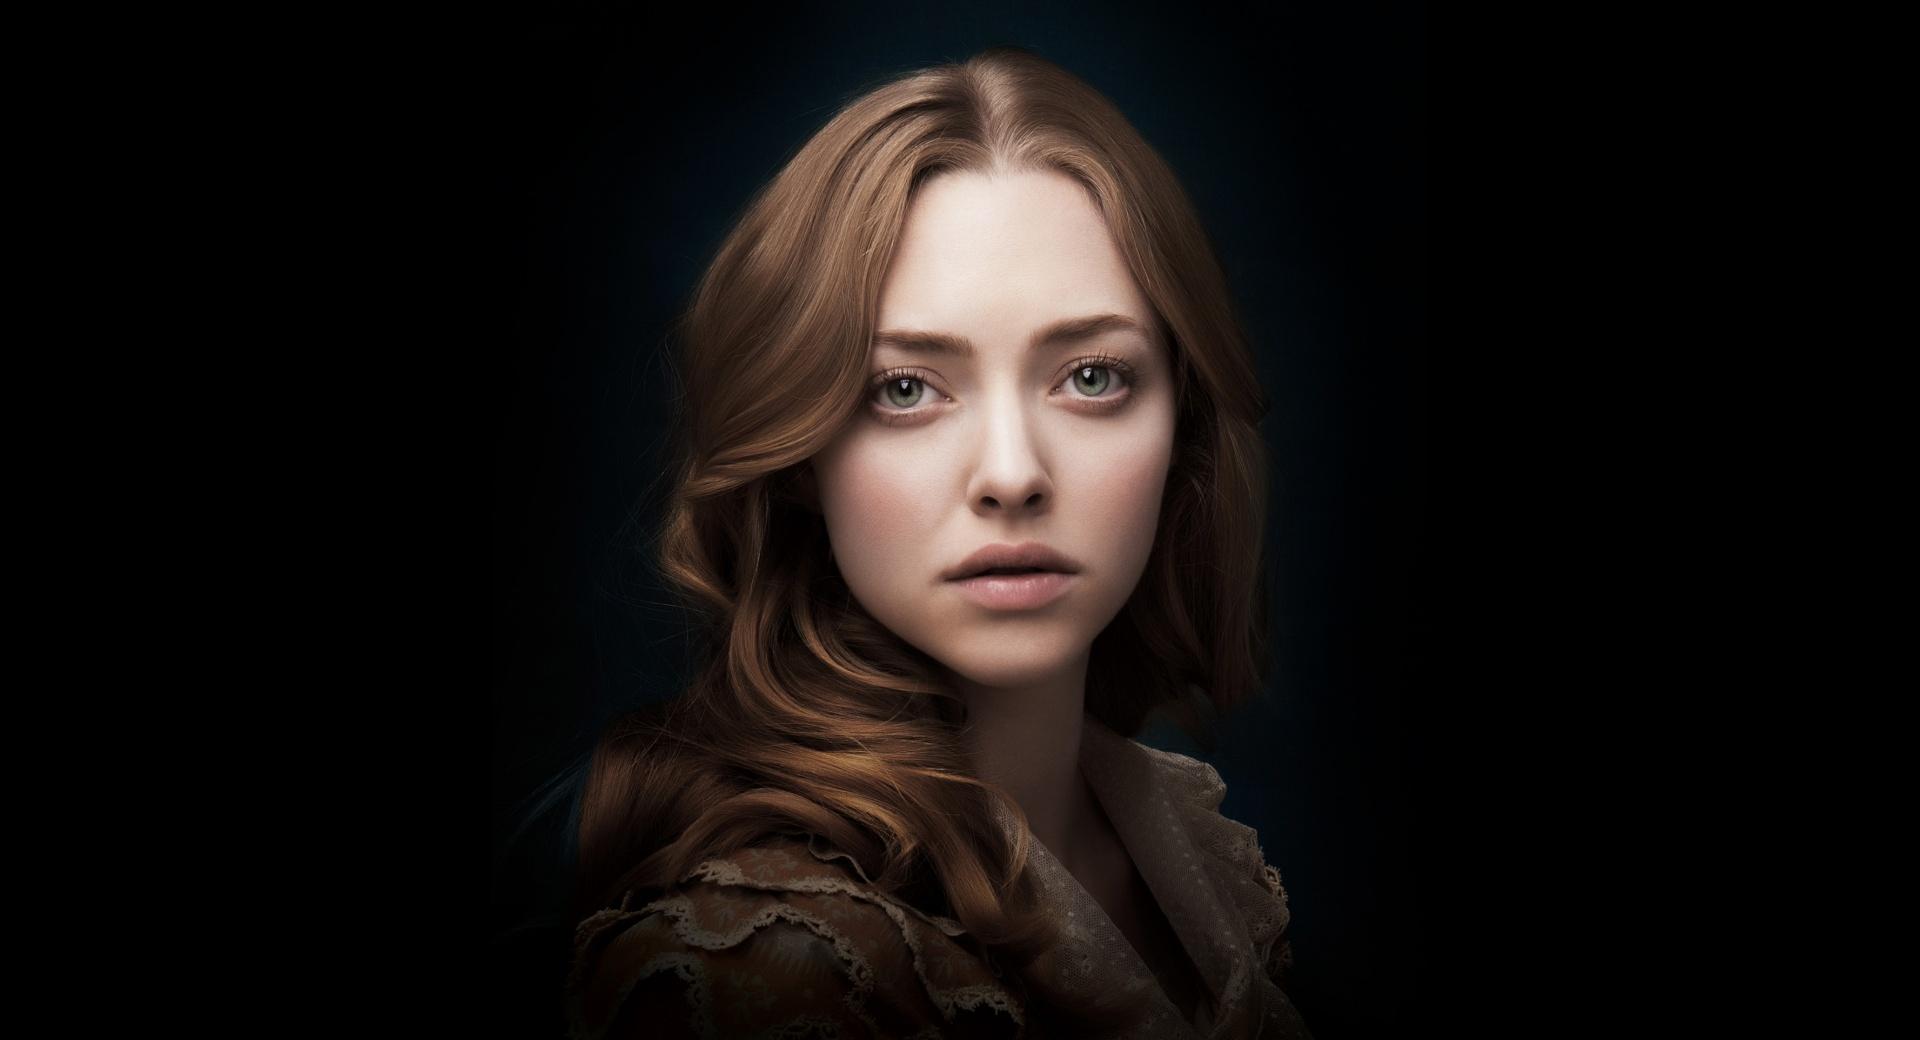 Les Miserables - Amanda Seyfried as Cosette wallpapers HD quality